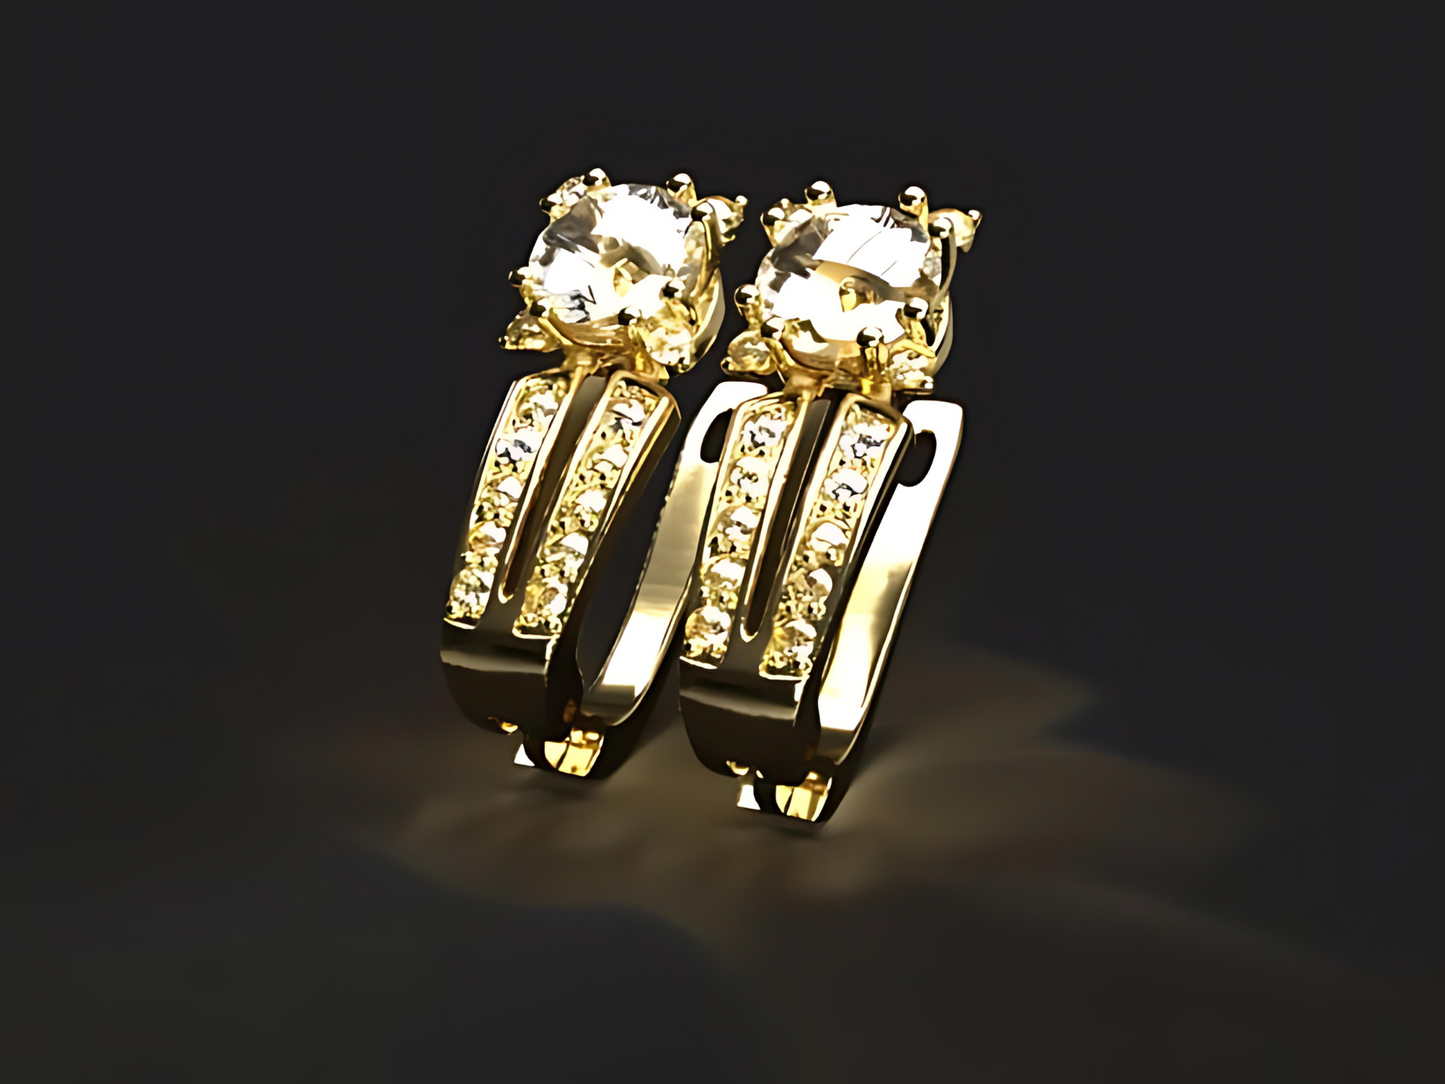 Handmade gold earrings with natural Vs high quality Diamonds.